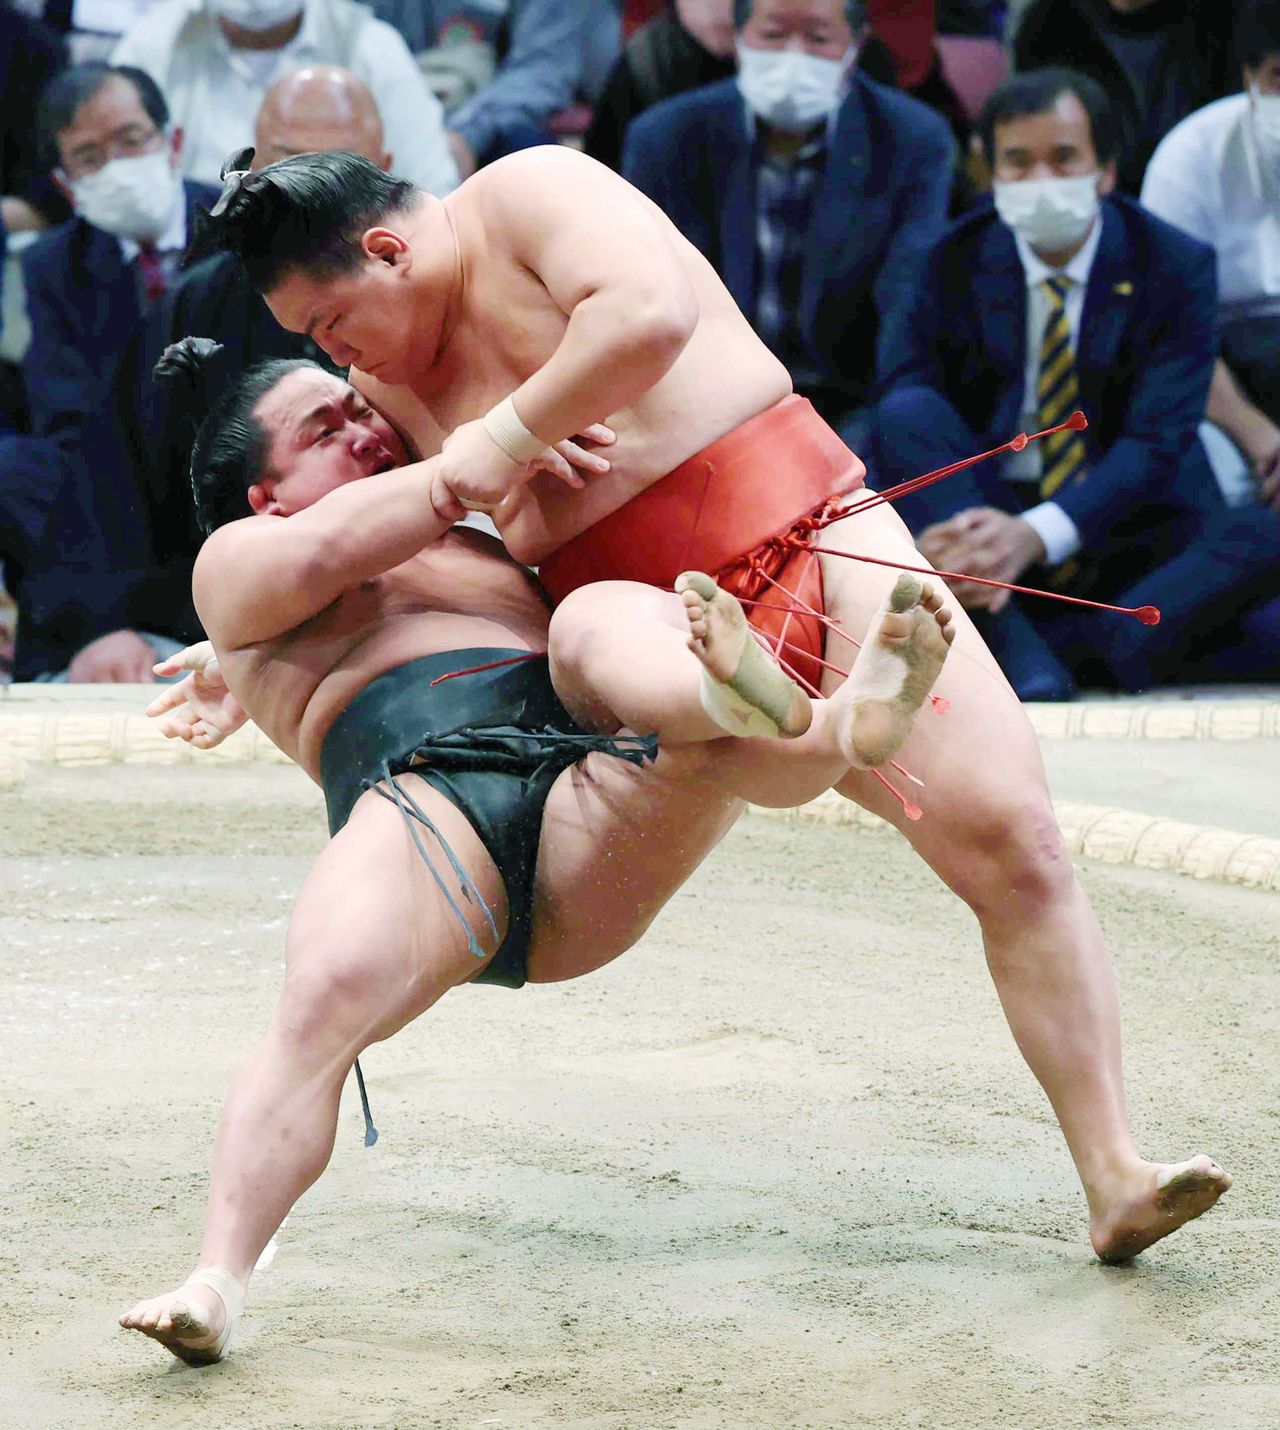 Sekiwake Hōshōryū (23), at right, earned the Technique Prize at the November 2022 basho with a repertoire of moves including the kawazugake leg entanglement throw. With spectacular lower body strength like that of his uncle, the former yokozuna Asashōryū, he is also a prime contender for promotion to ōzeki. (© Jiji)